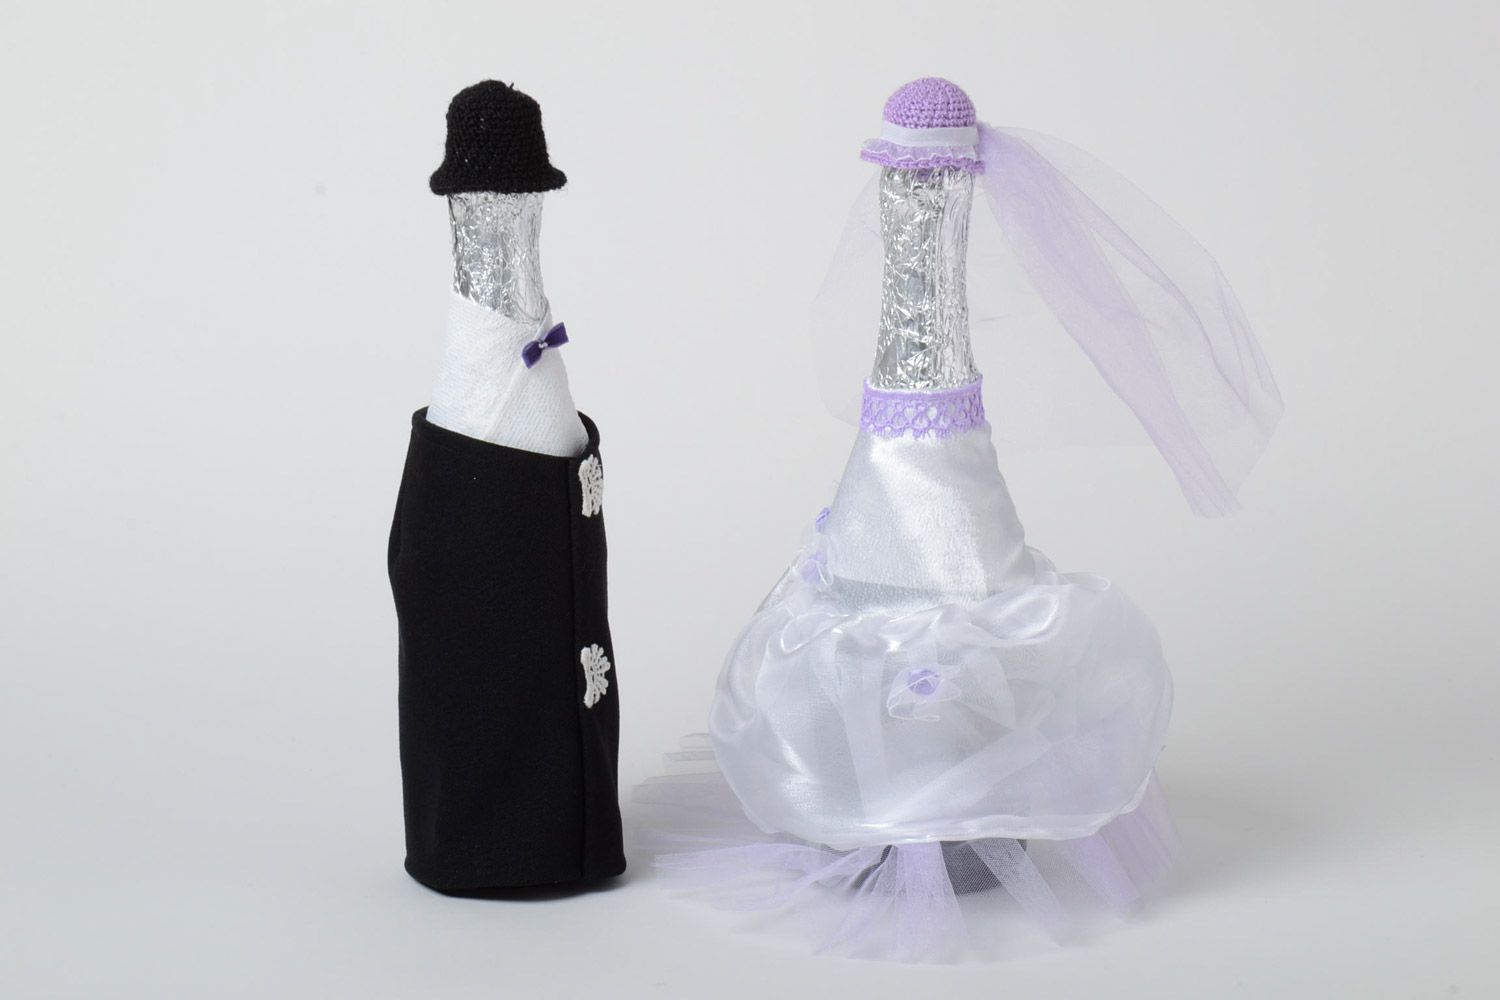 Handmade wedding decorations for champagne bottles suits of bride and groom photo 2